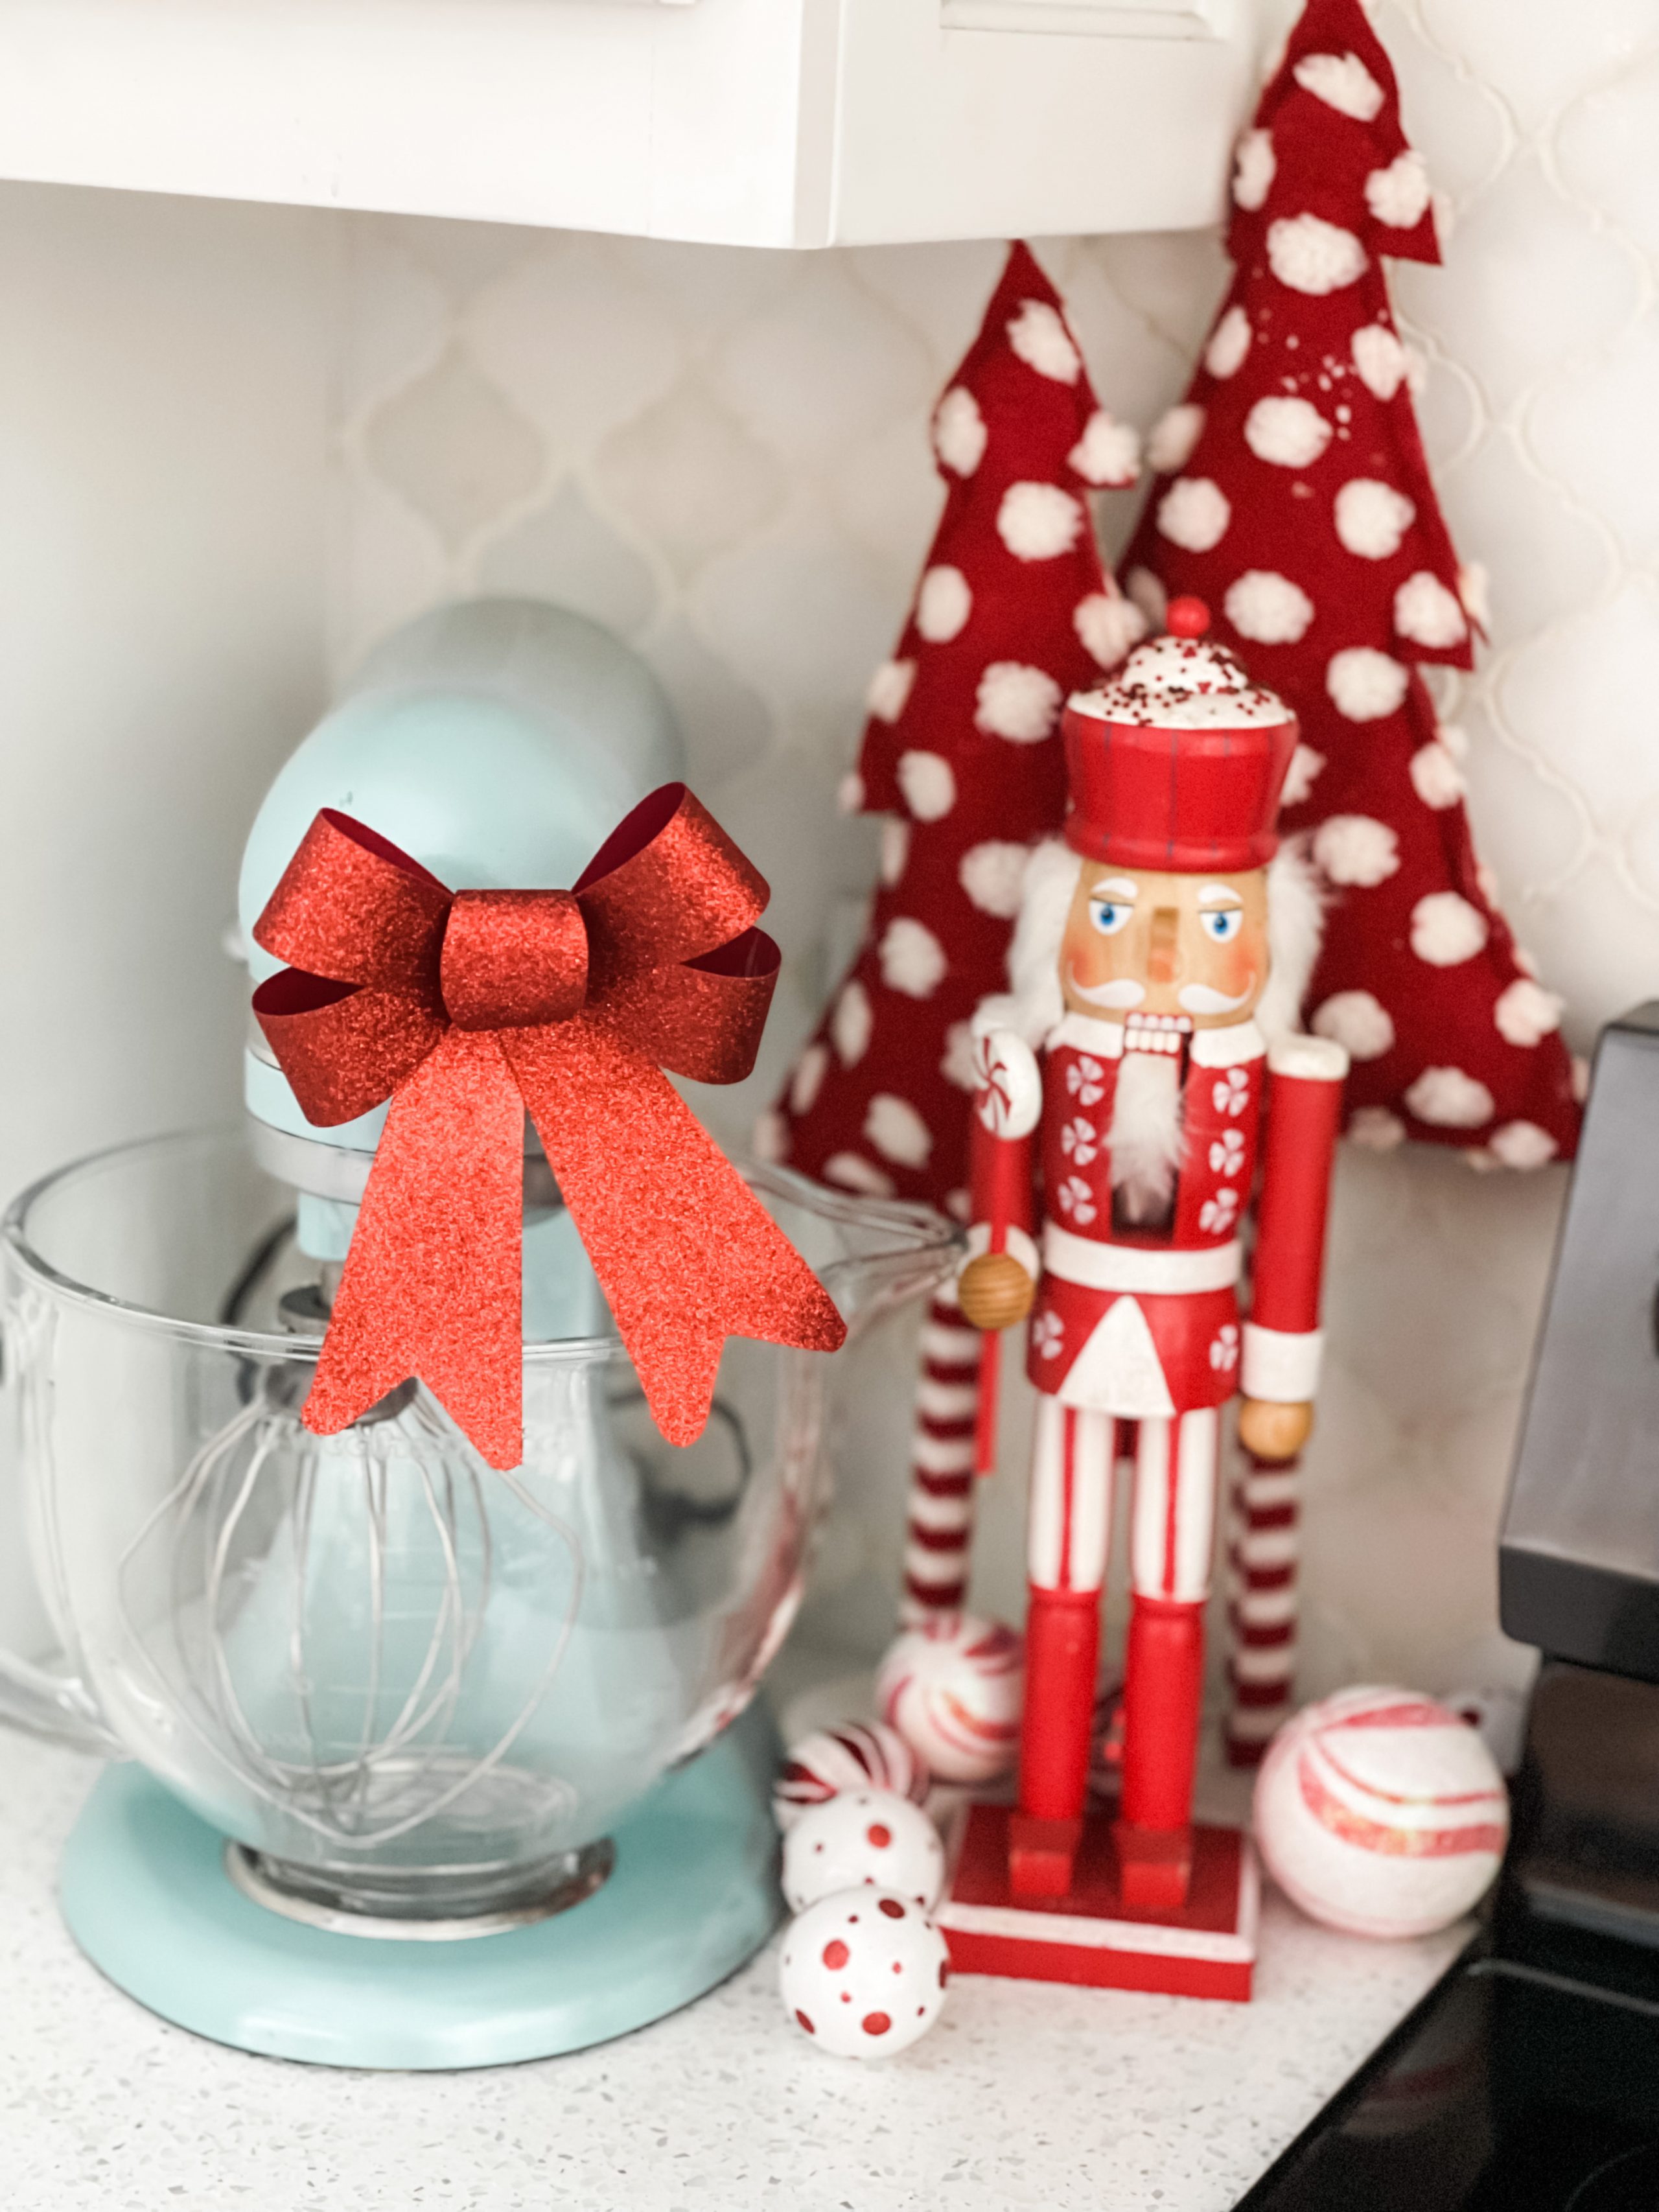 https://www.re-fabbed.com/wp-content/uploads/2021/11/christmas-kitchen-red-and-white-gingerbread6.jpg